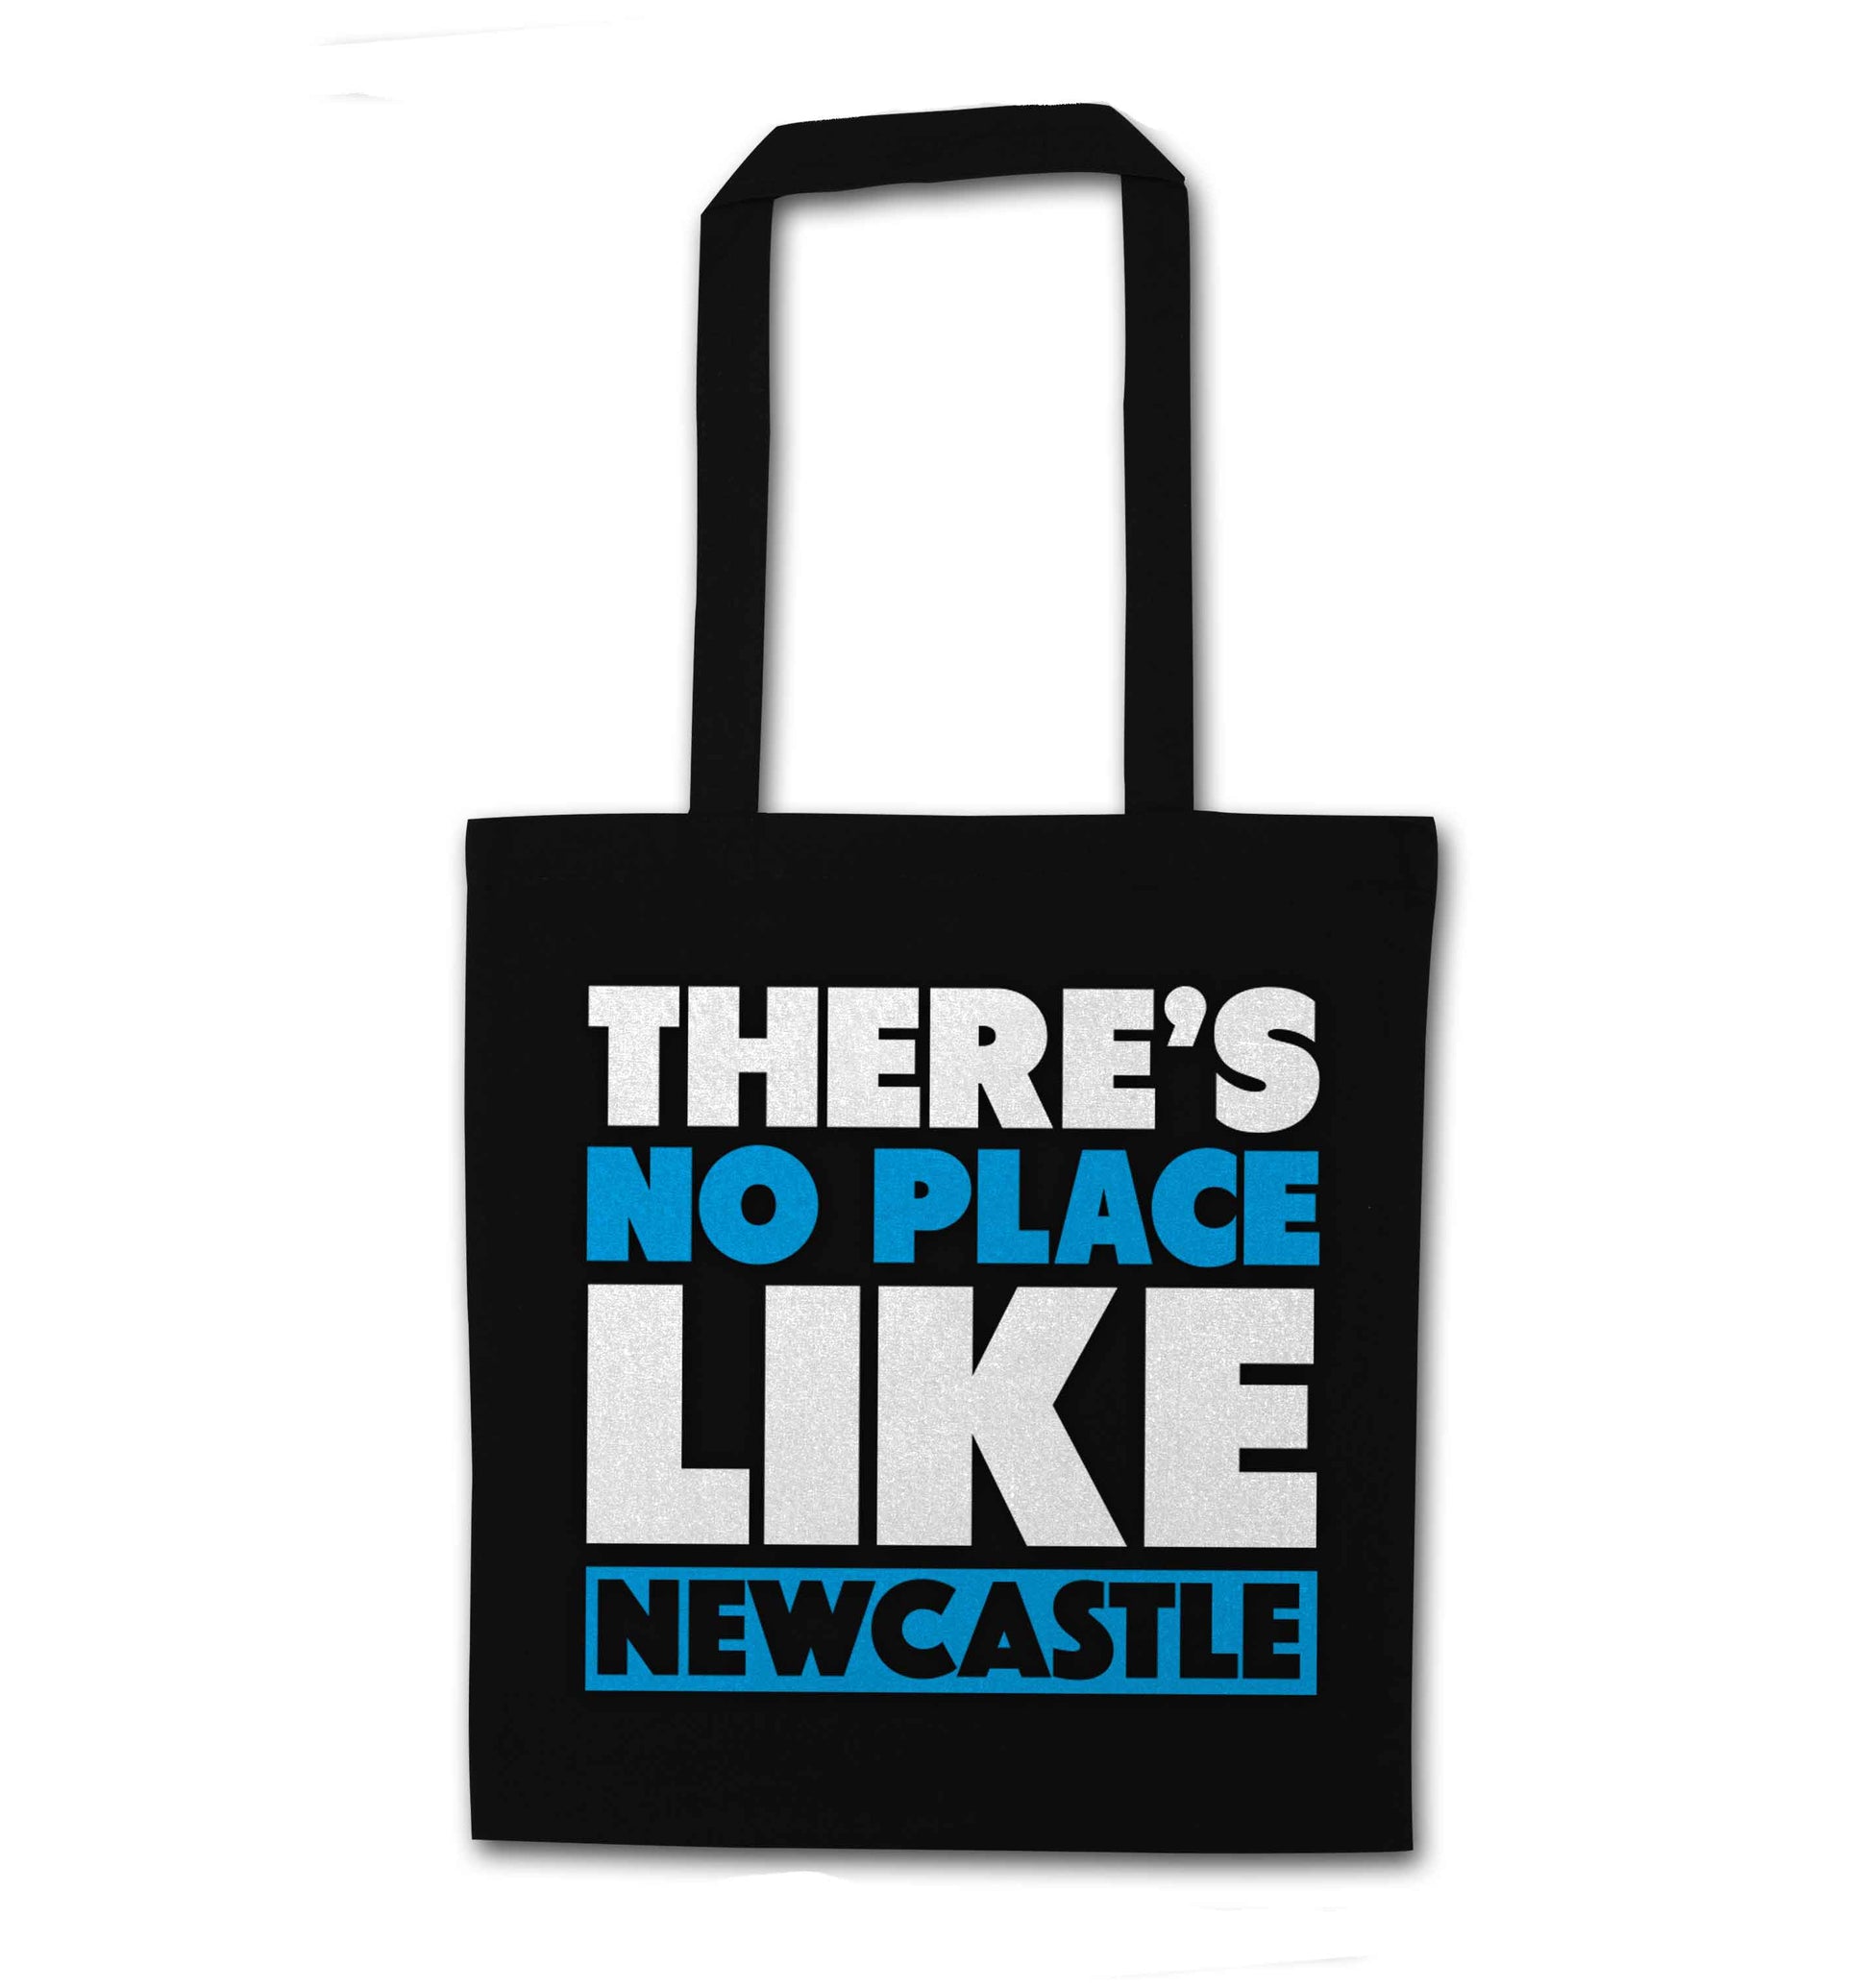 There's no place like Newcastle black tote bag